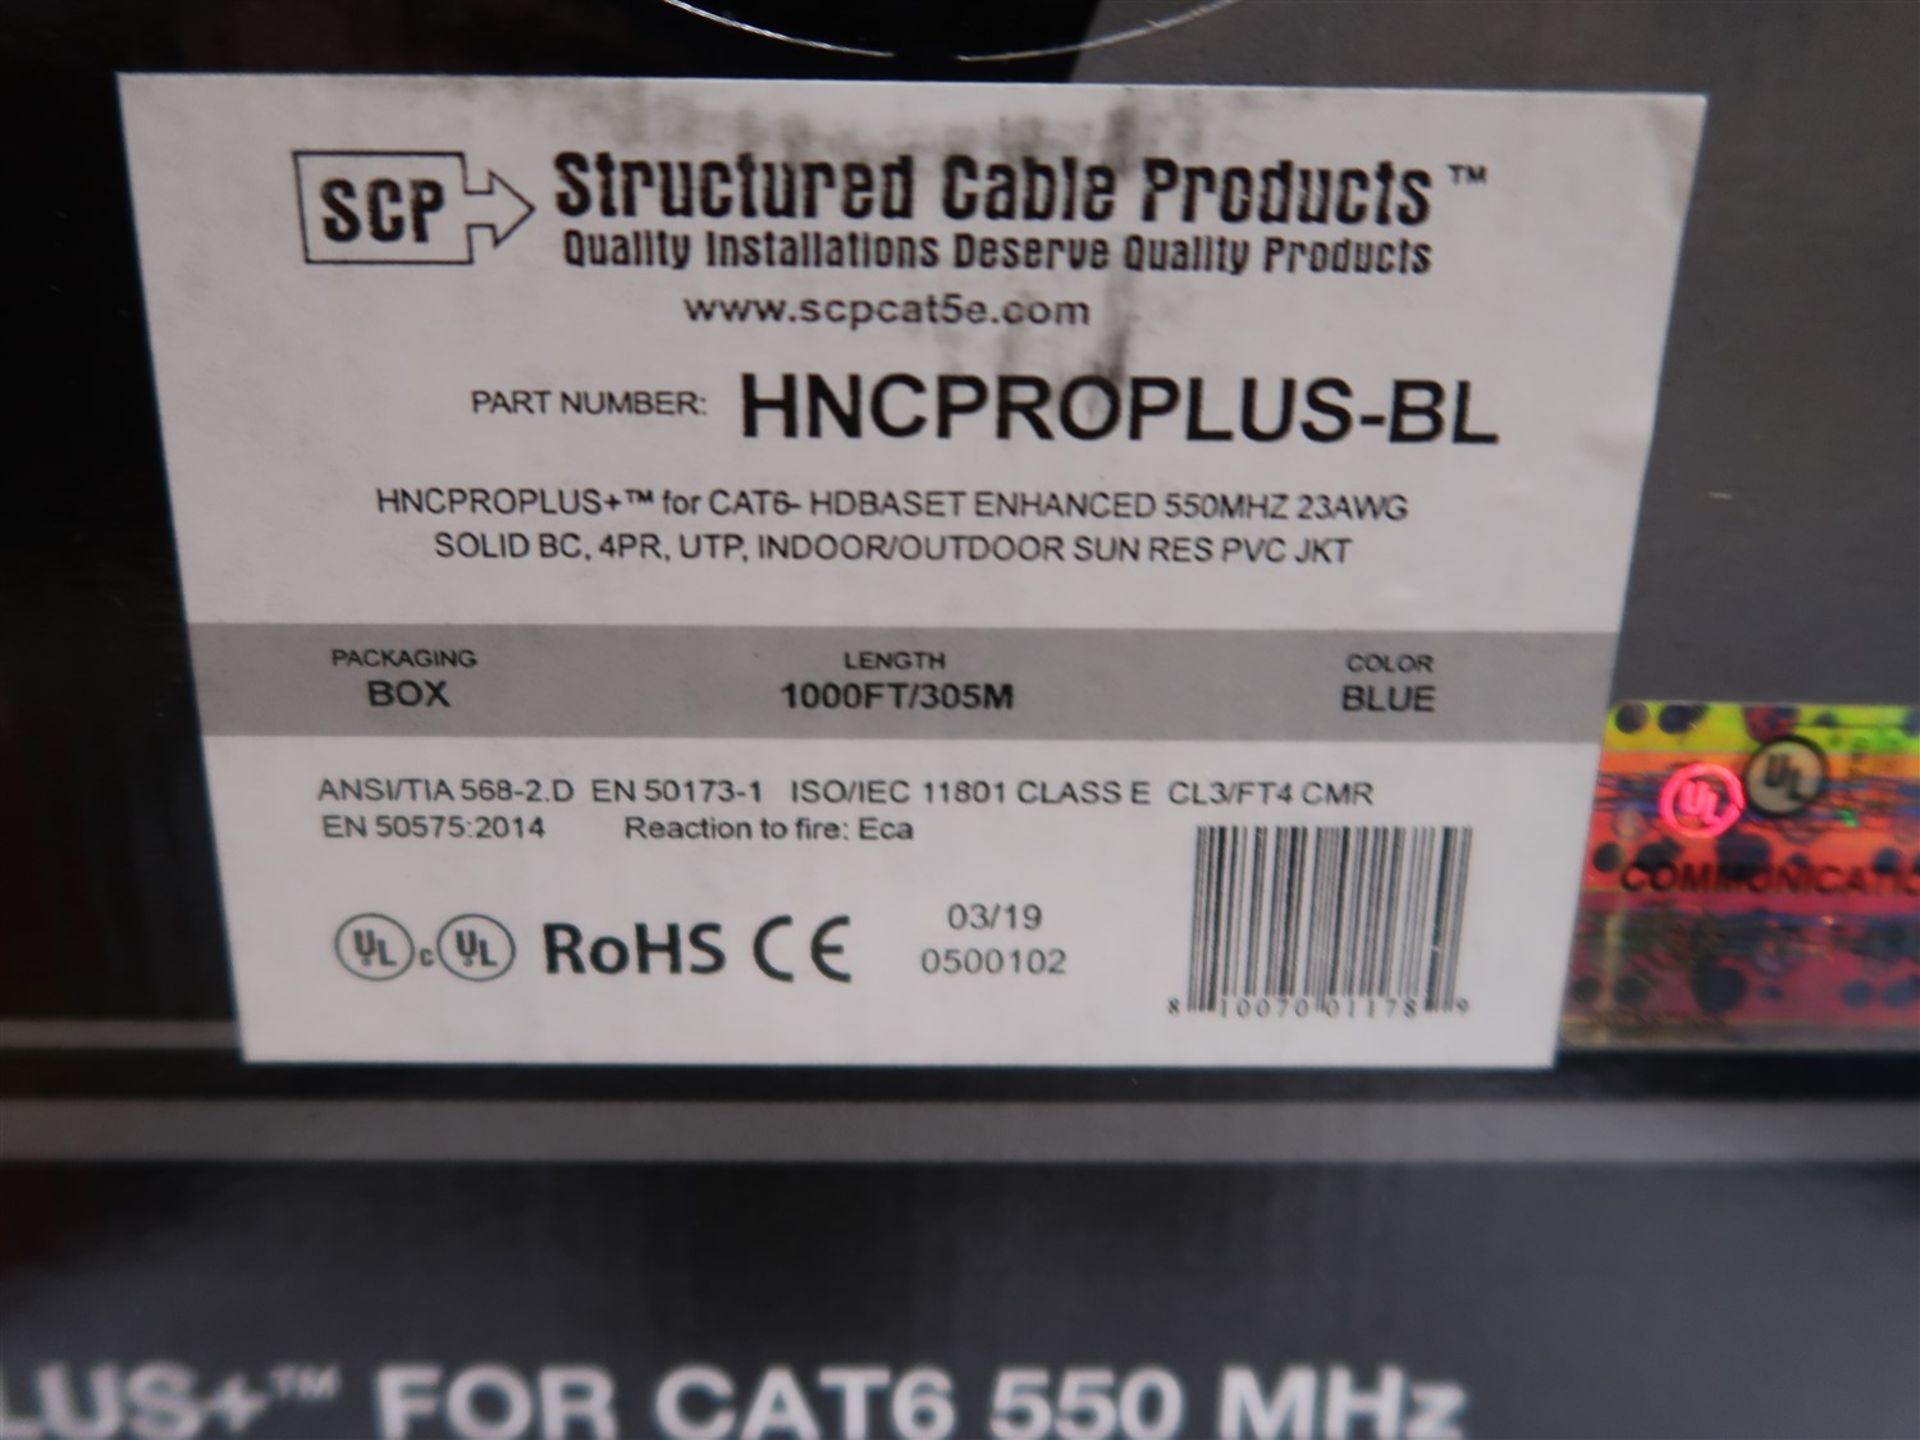 BOX OF SCP HNC PROPLUS-BL FOR CAT 6 HOBASET ENHANCED 550 MHZ 23 AWG SOLID BC, 4PR UTP INDOOR/OUTDOOR - Image 2 of 2